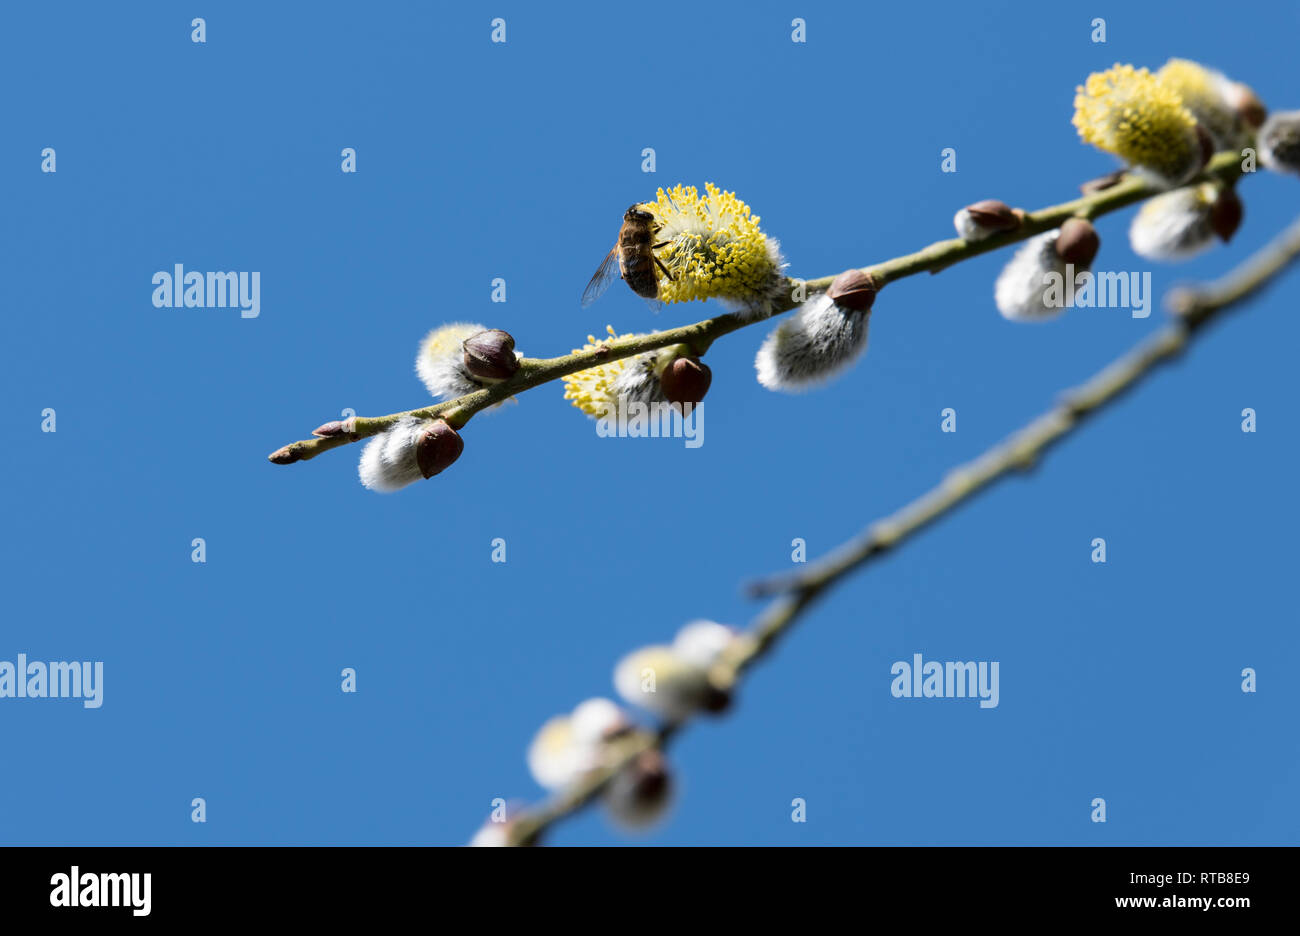 Risen blooming inflorescences male flowering catkin or ament on a Salix , willow in early spring before the leaves. Collect pollen from flowers and buds. Honey plants Europe with wasp Stock Photo